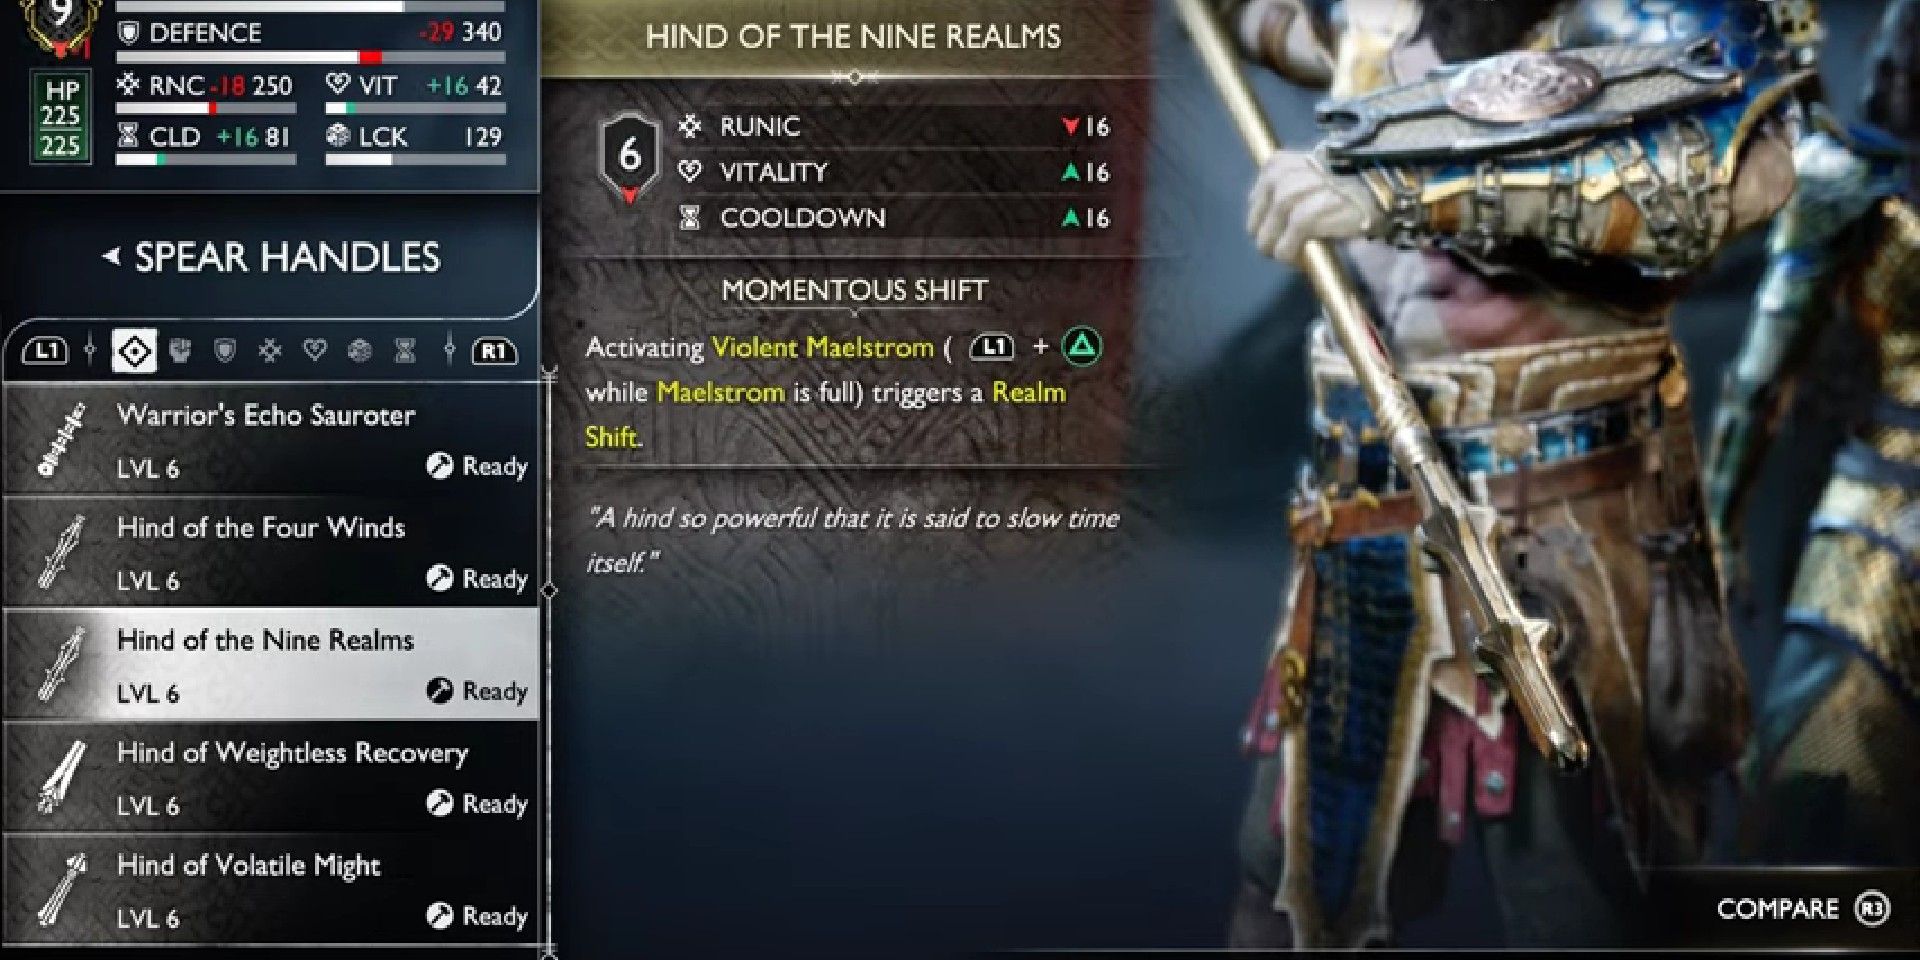 God of War Ragnarok Hind of the Nine Realms weapon attachment